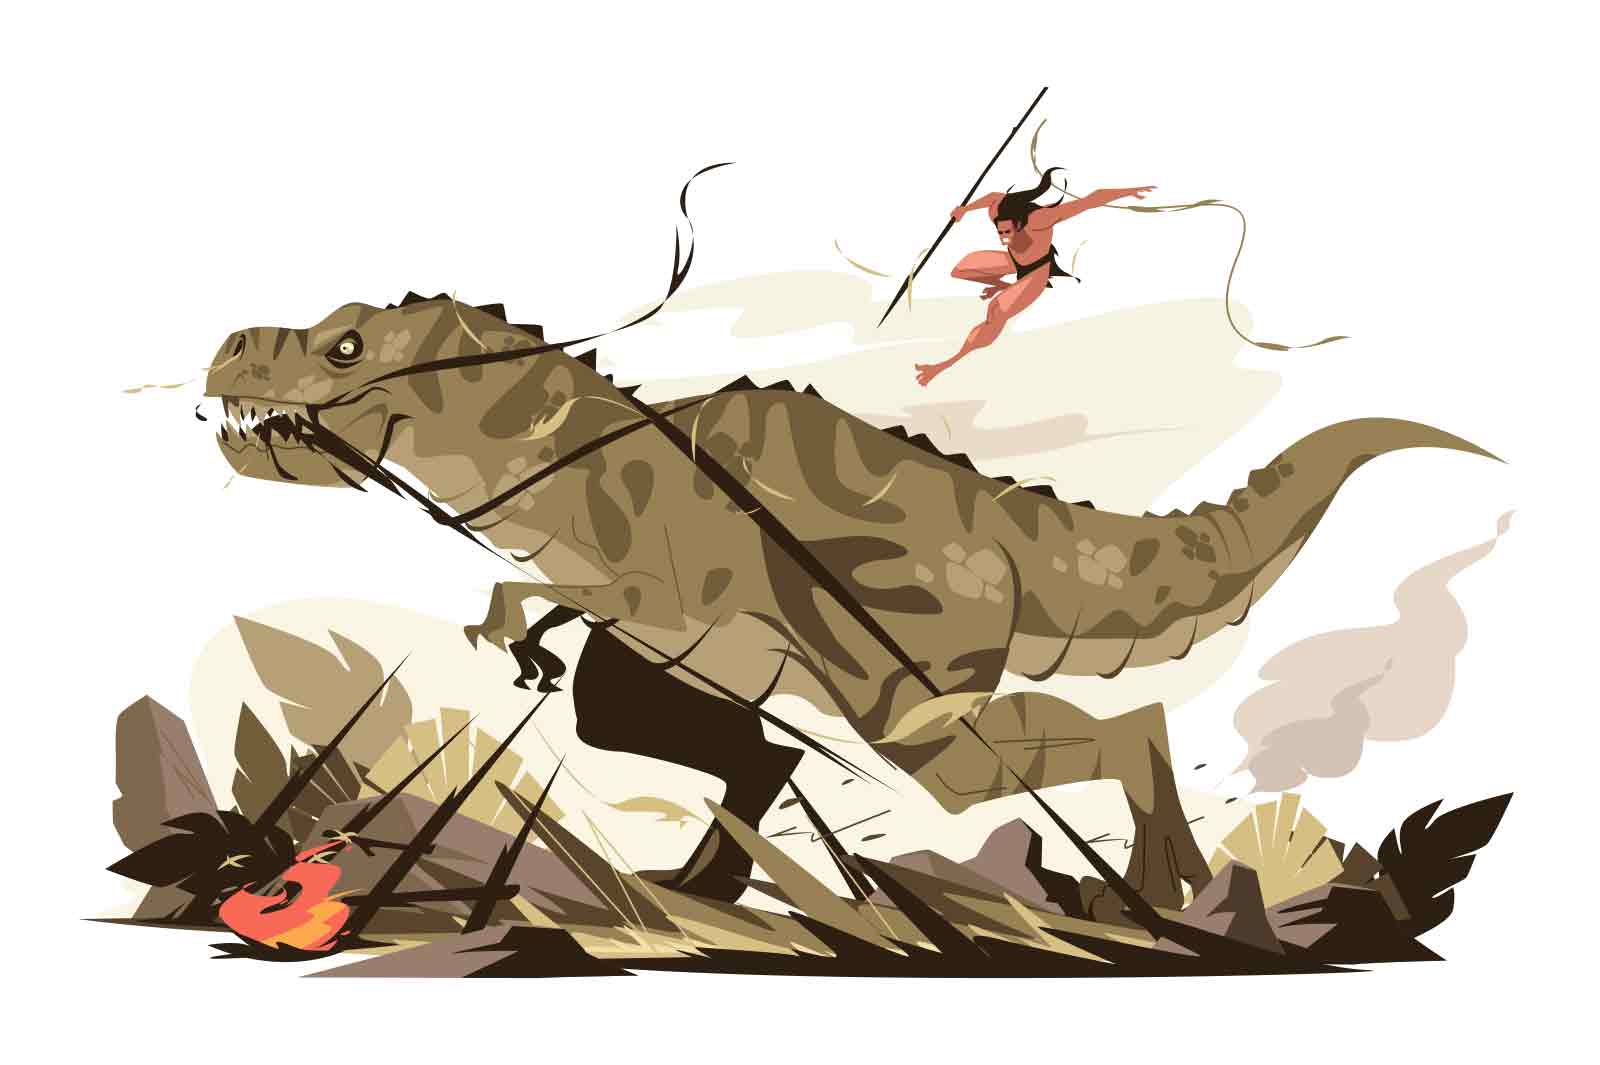 Warrior fighting with dinosaur vector illustration. Fighter with spear attaching tyrannosaurus flat concept. Prehistoric world of dinosaurs